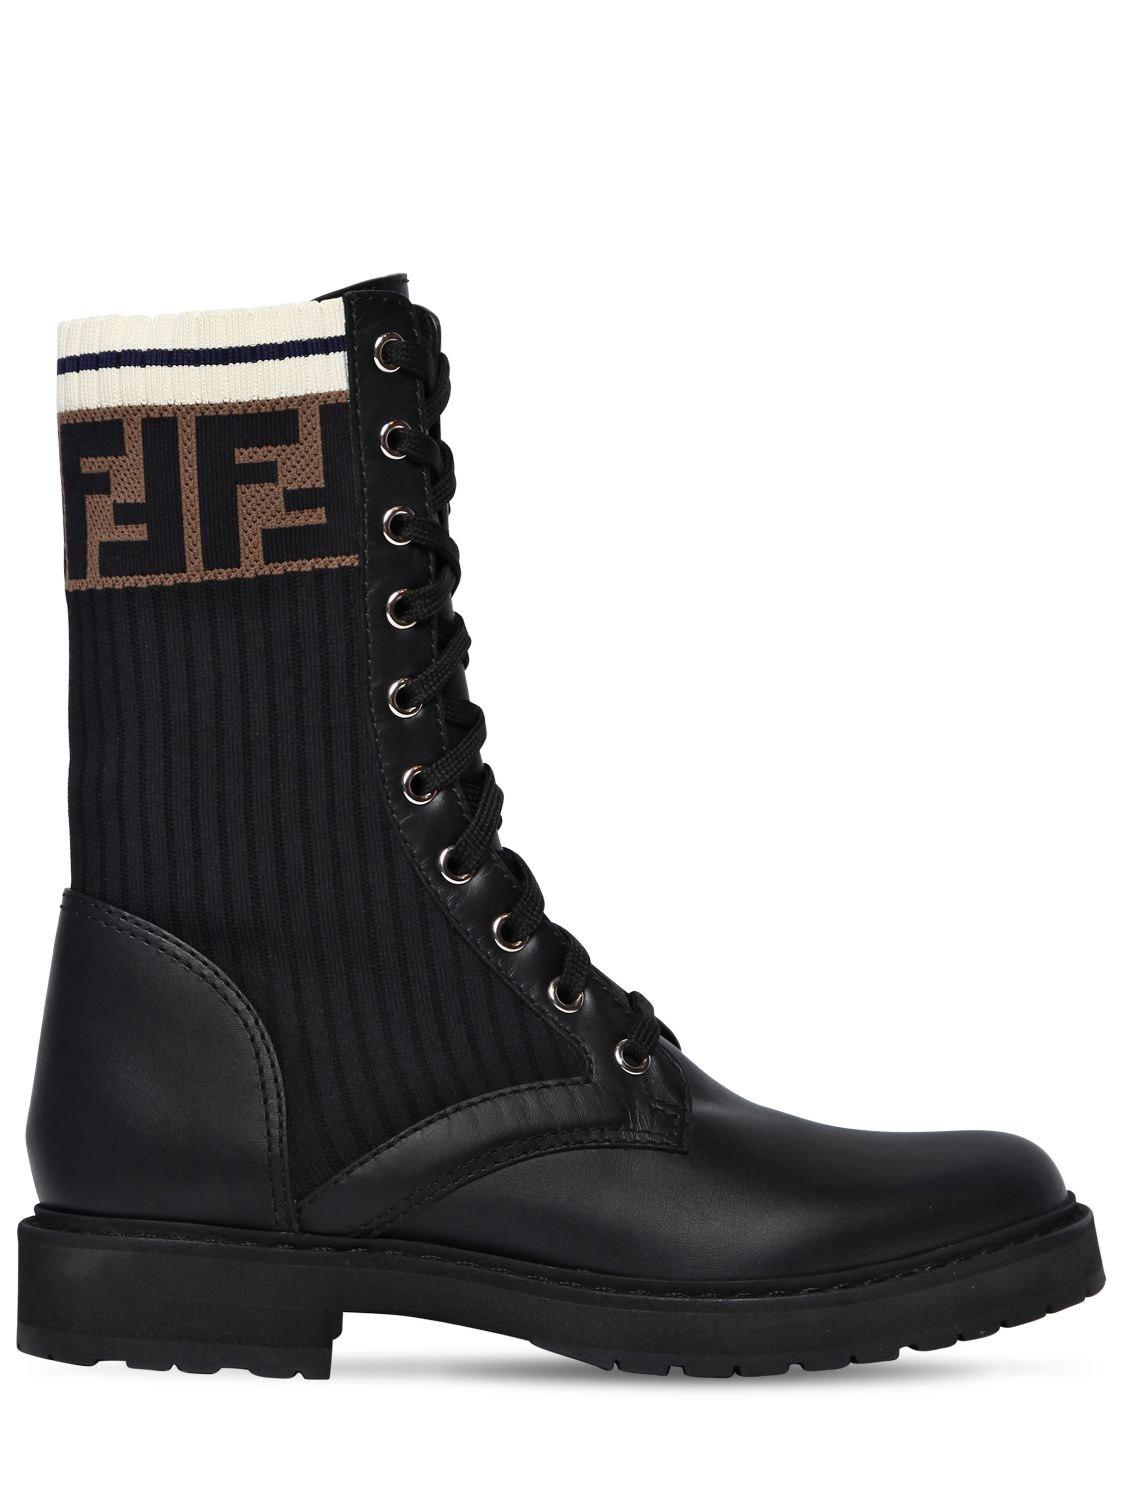 Fendi 20mm Leather & Knit Combat Boots in Black - Lyst